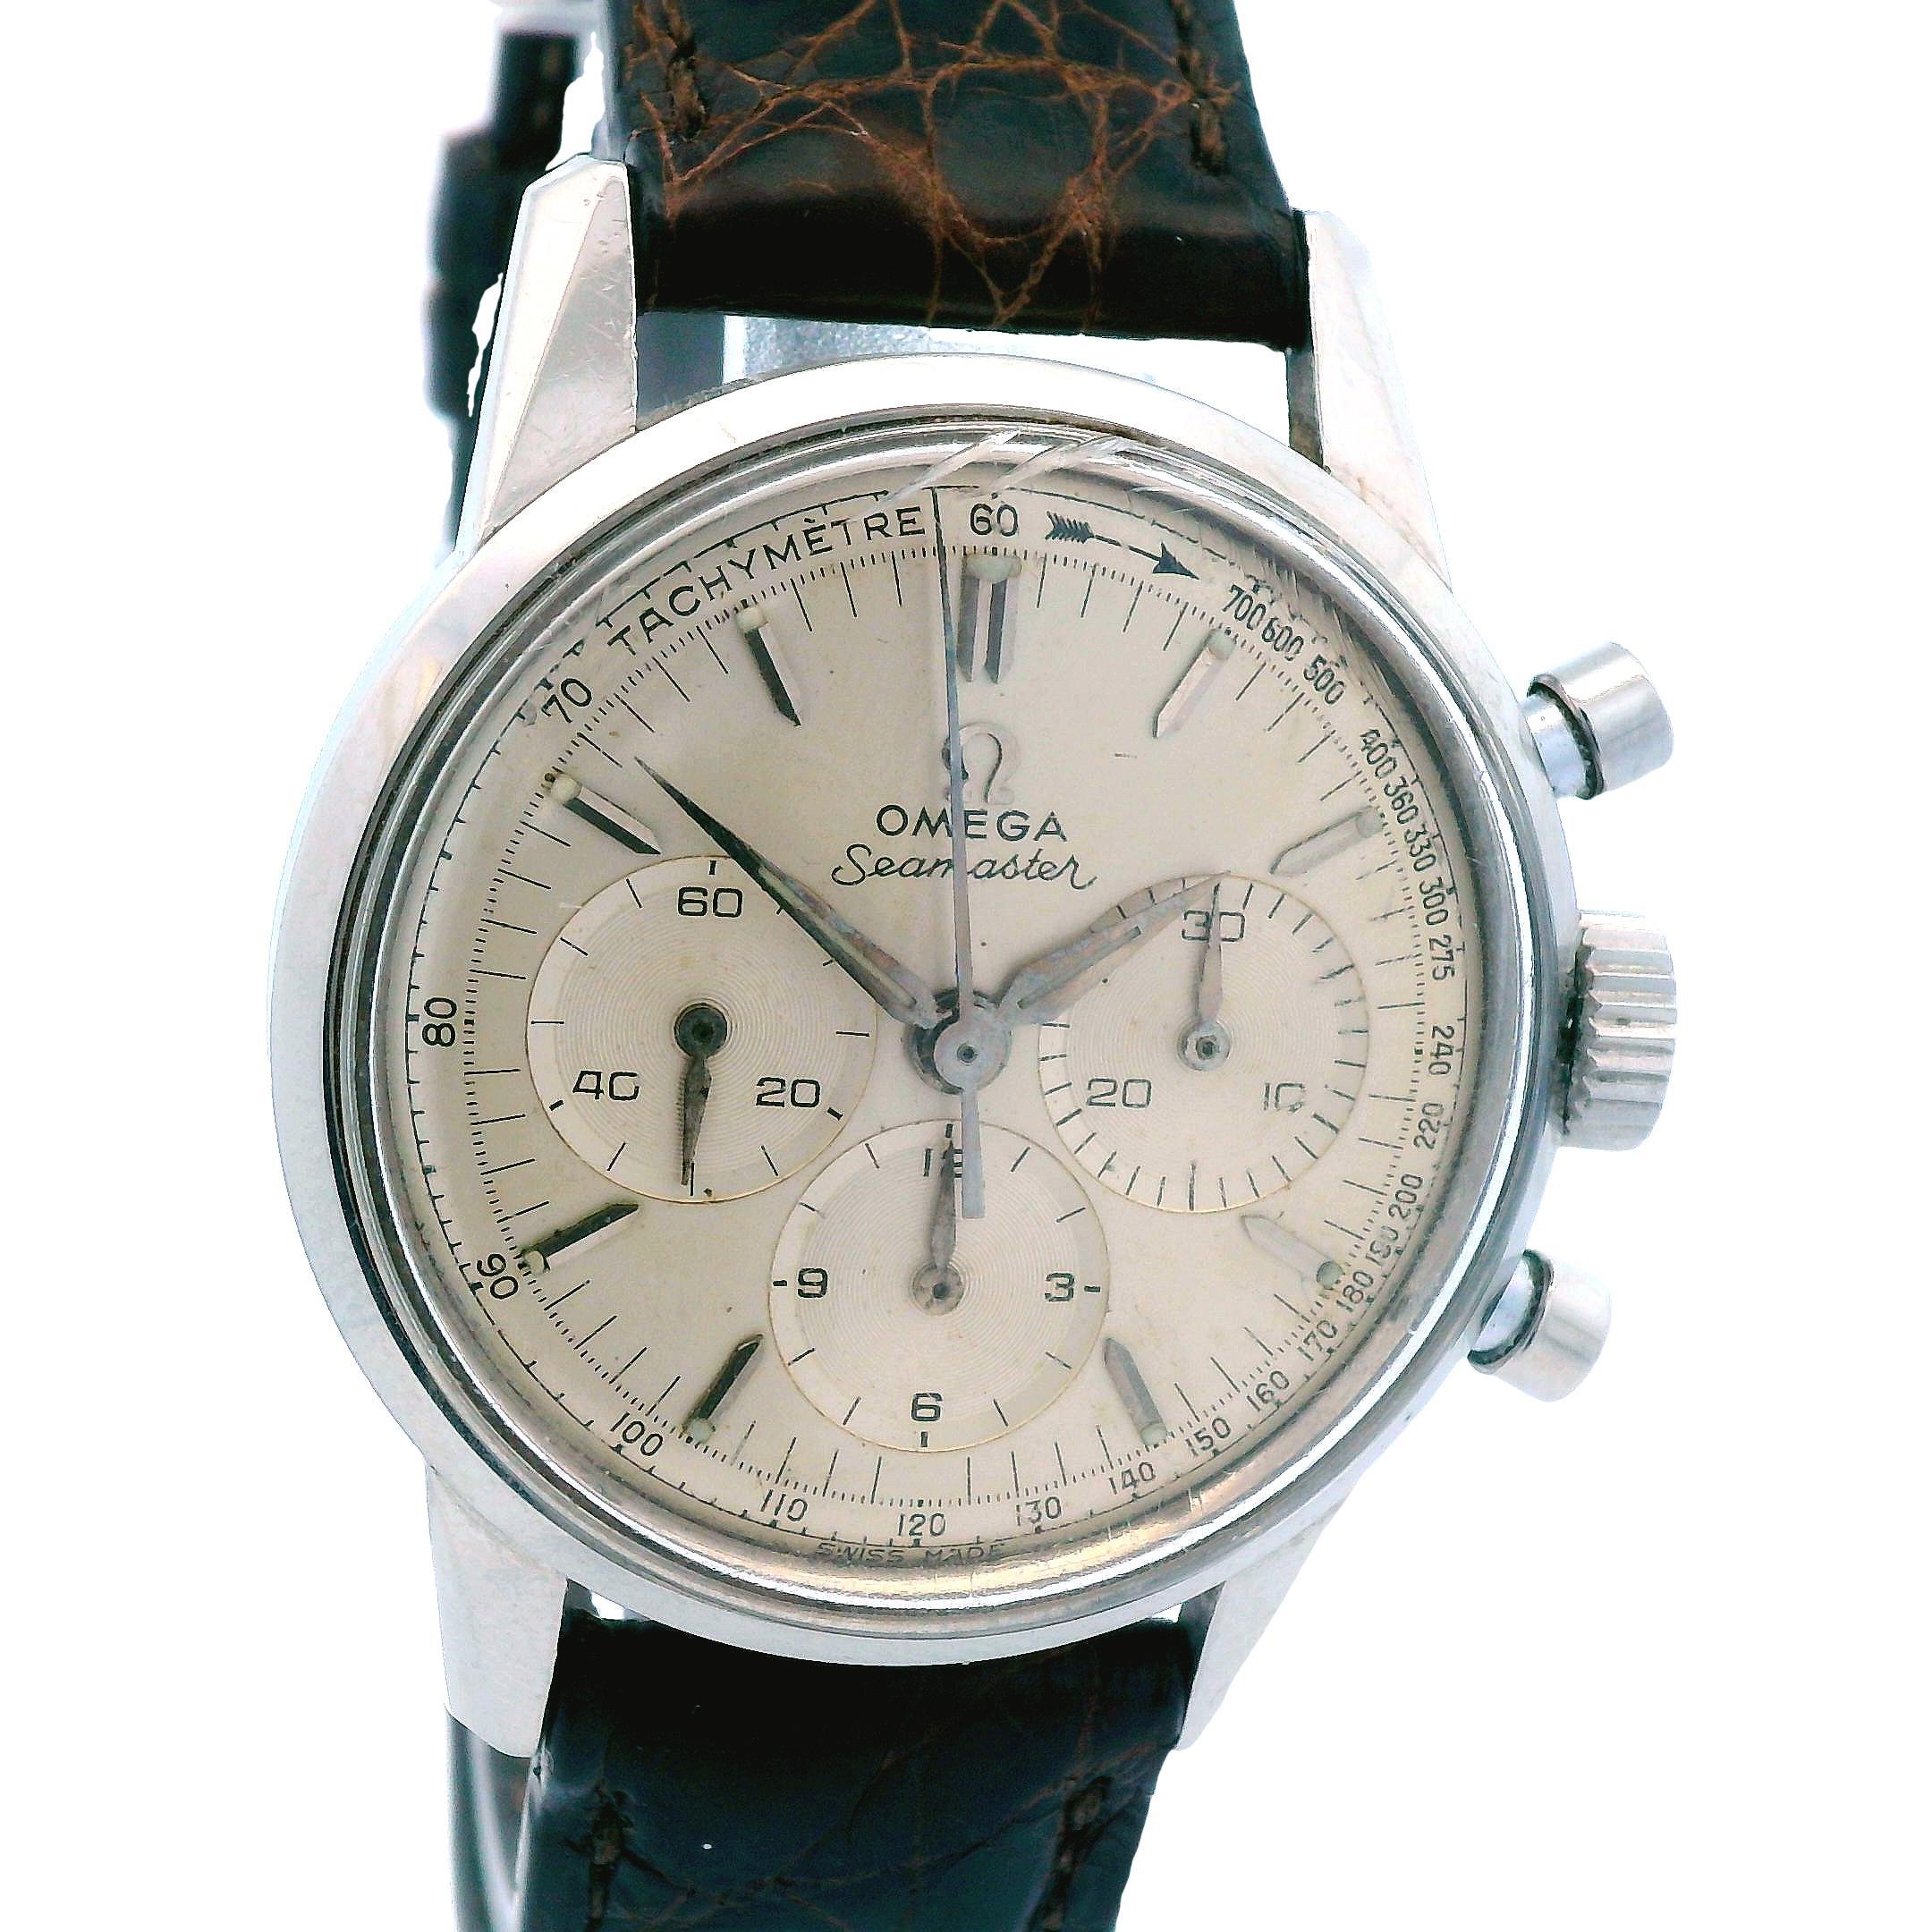 1960s Omega Seamaster Chronograph Watch in Stainless Steel - Running For Sale 4